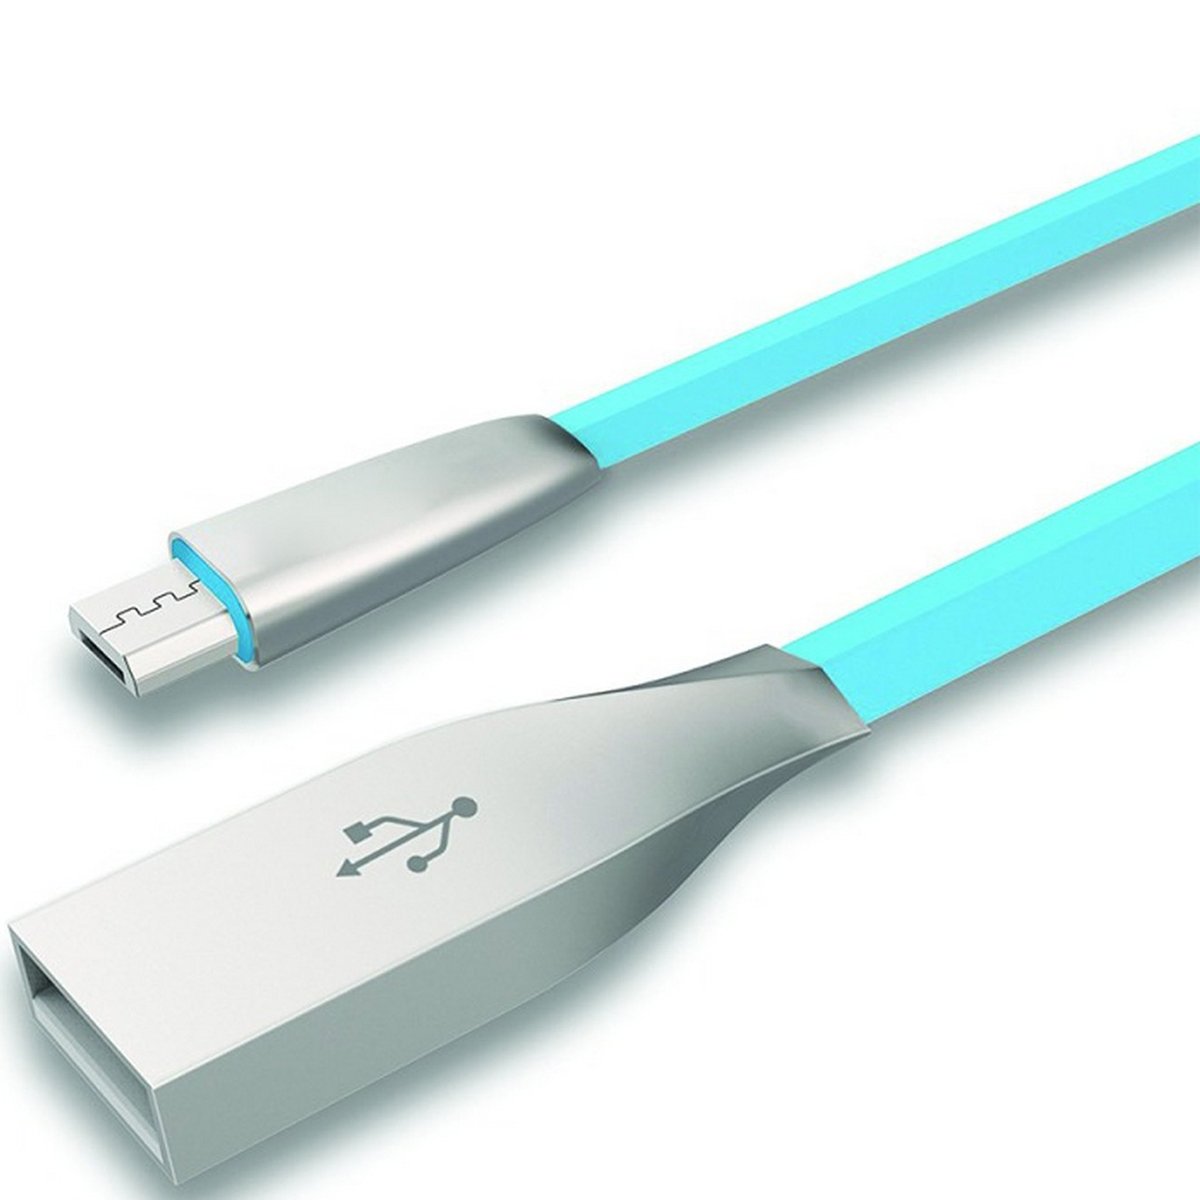 Iends Micro USB Cable IE-CA459